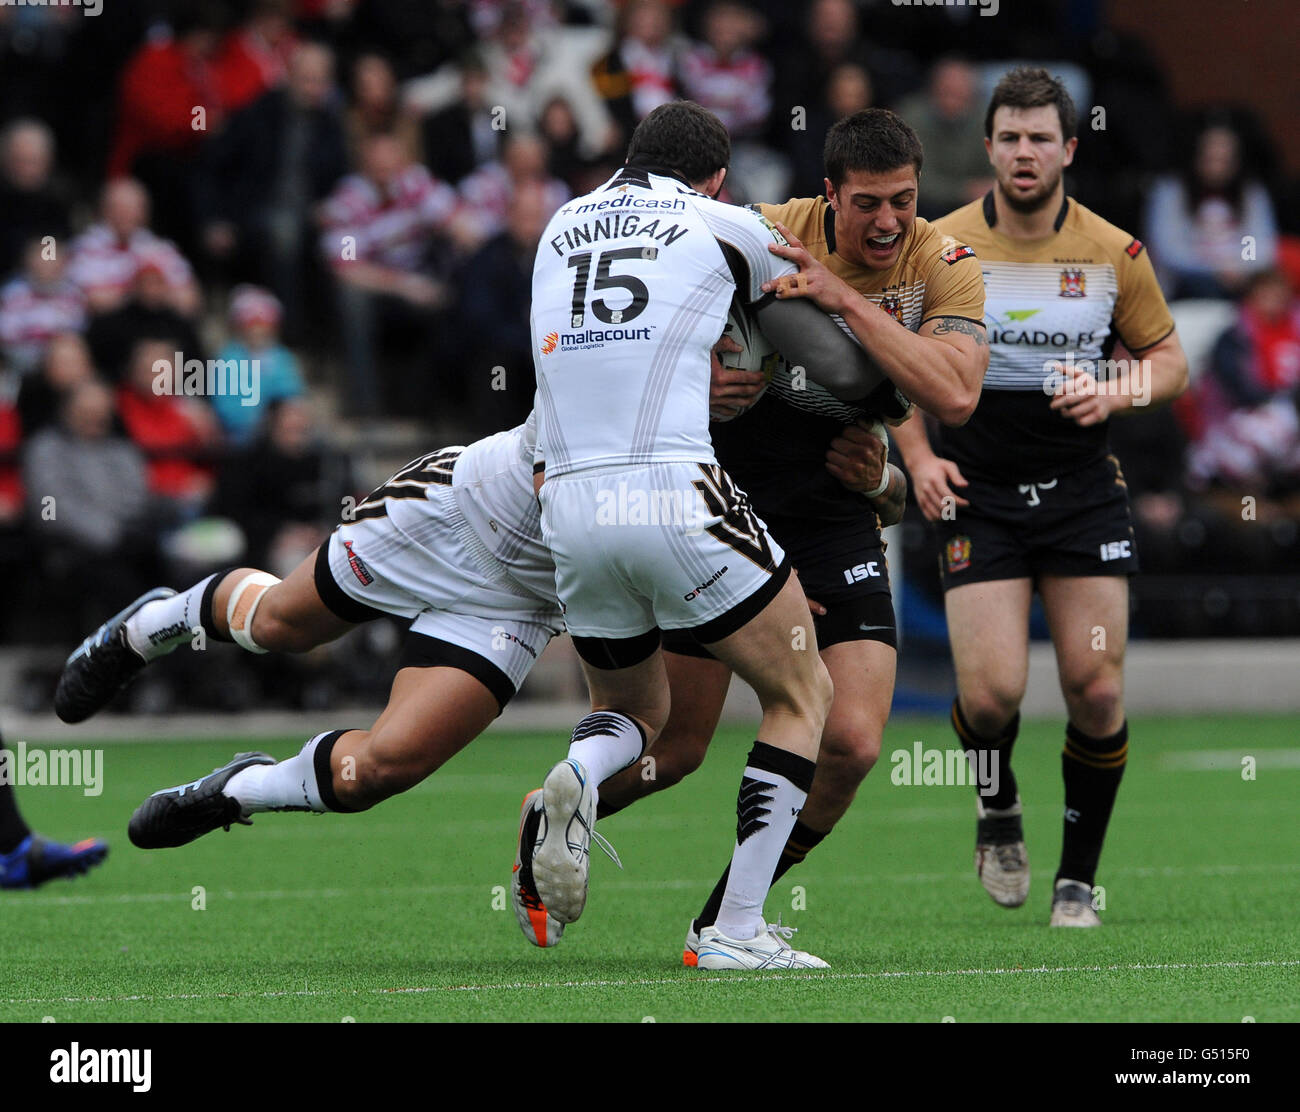 Wigan Warriors' Anthony Gelling is tackled by Widnes Vikings' Simon Finnigan (15) and Frank Winterstein (hidden). Stock Photo